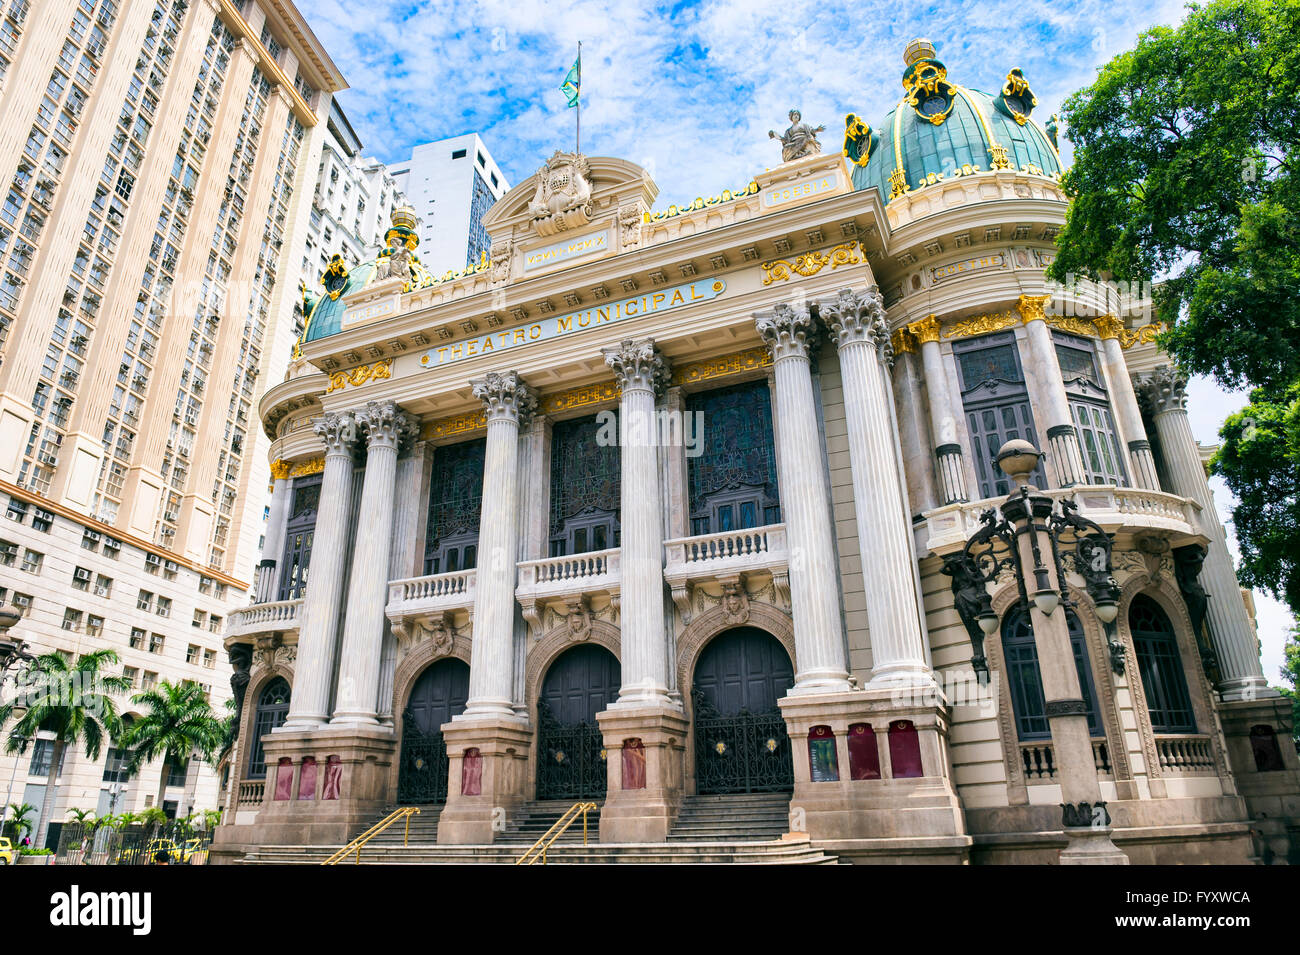 RIO DE JANEIRO - FEBRUARY 26, 2016: The Municipal Theatre, built in 1909 in an Art Nouveau style inspired by the Paris Opera. Stock Photo